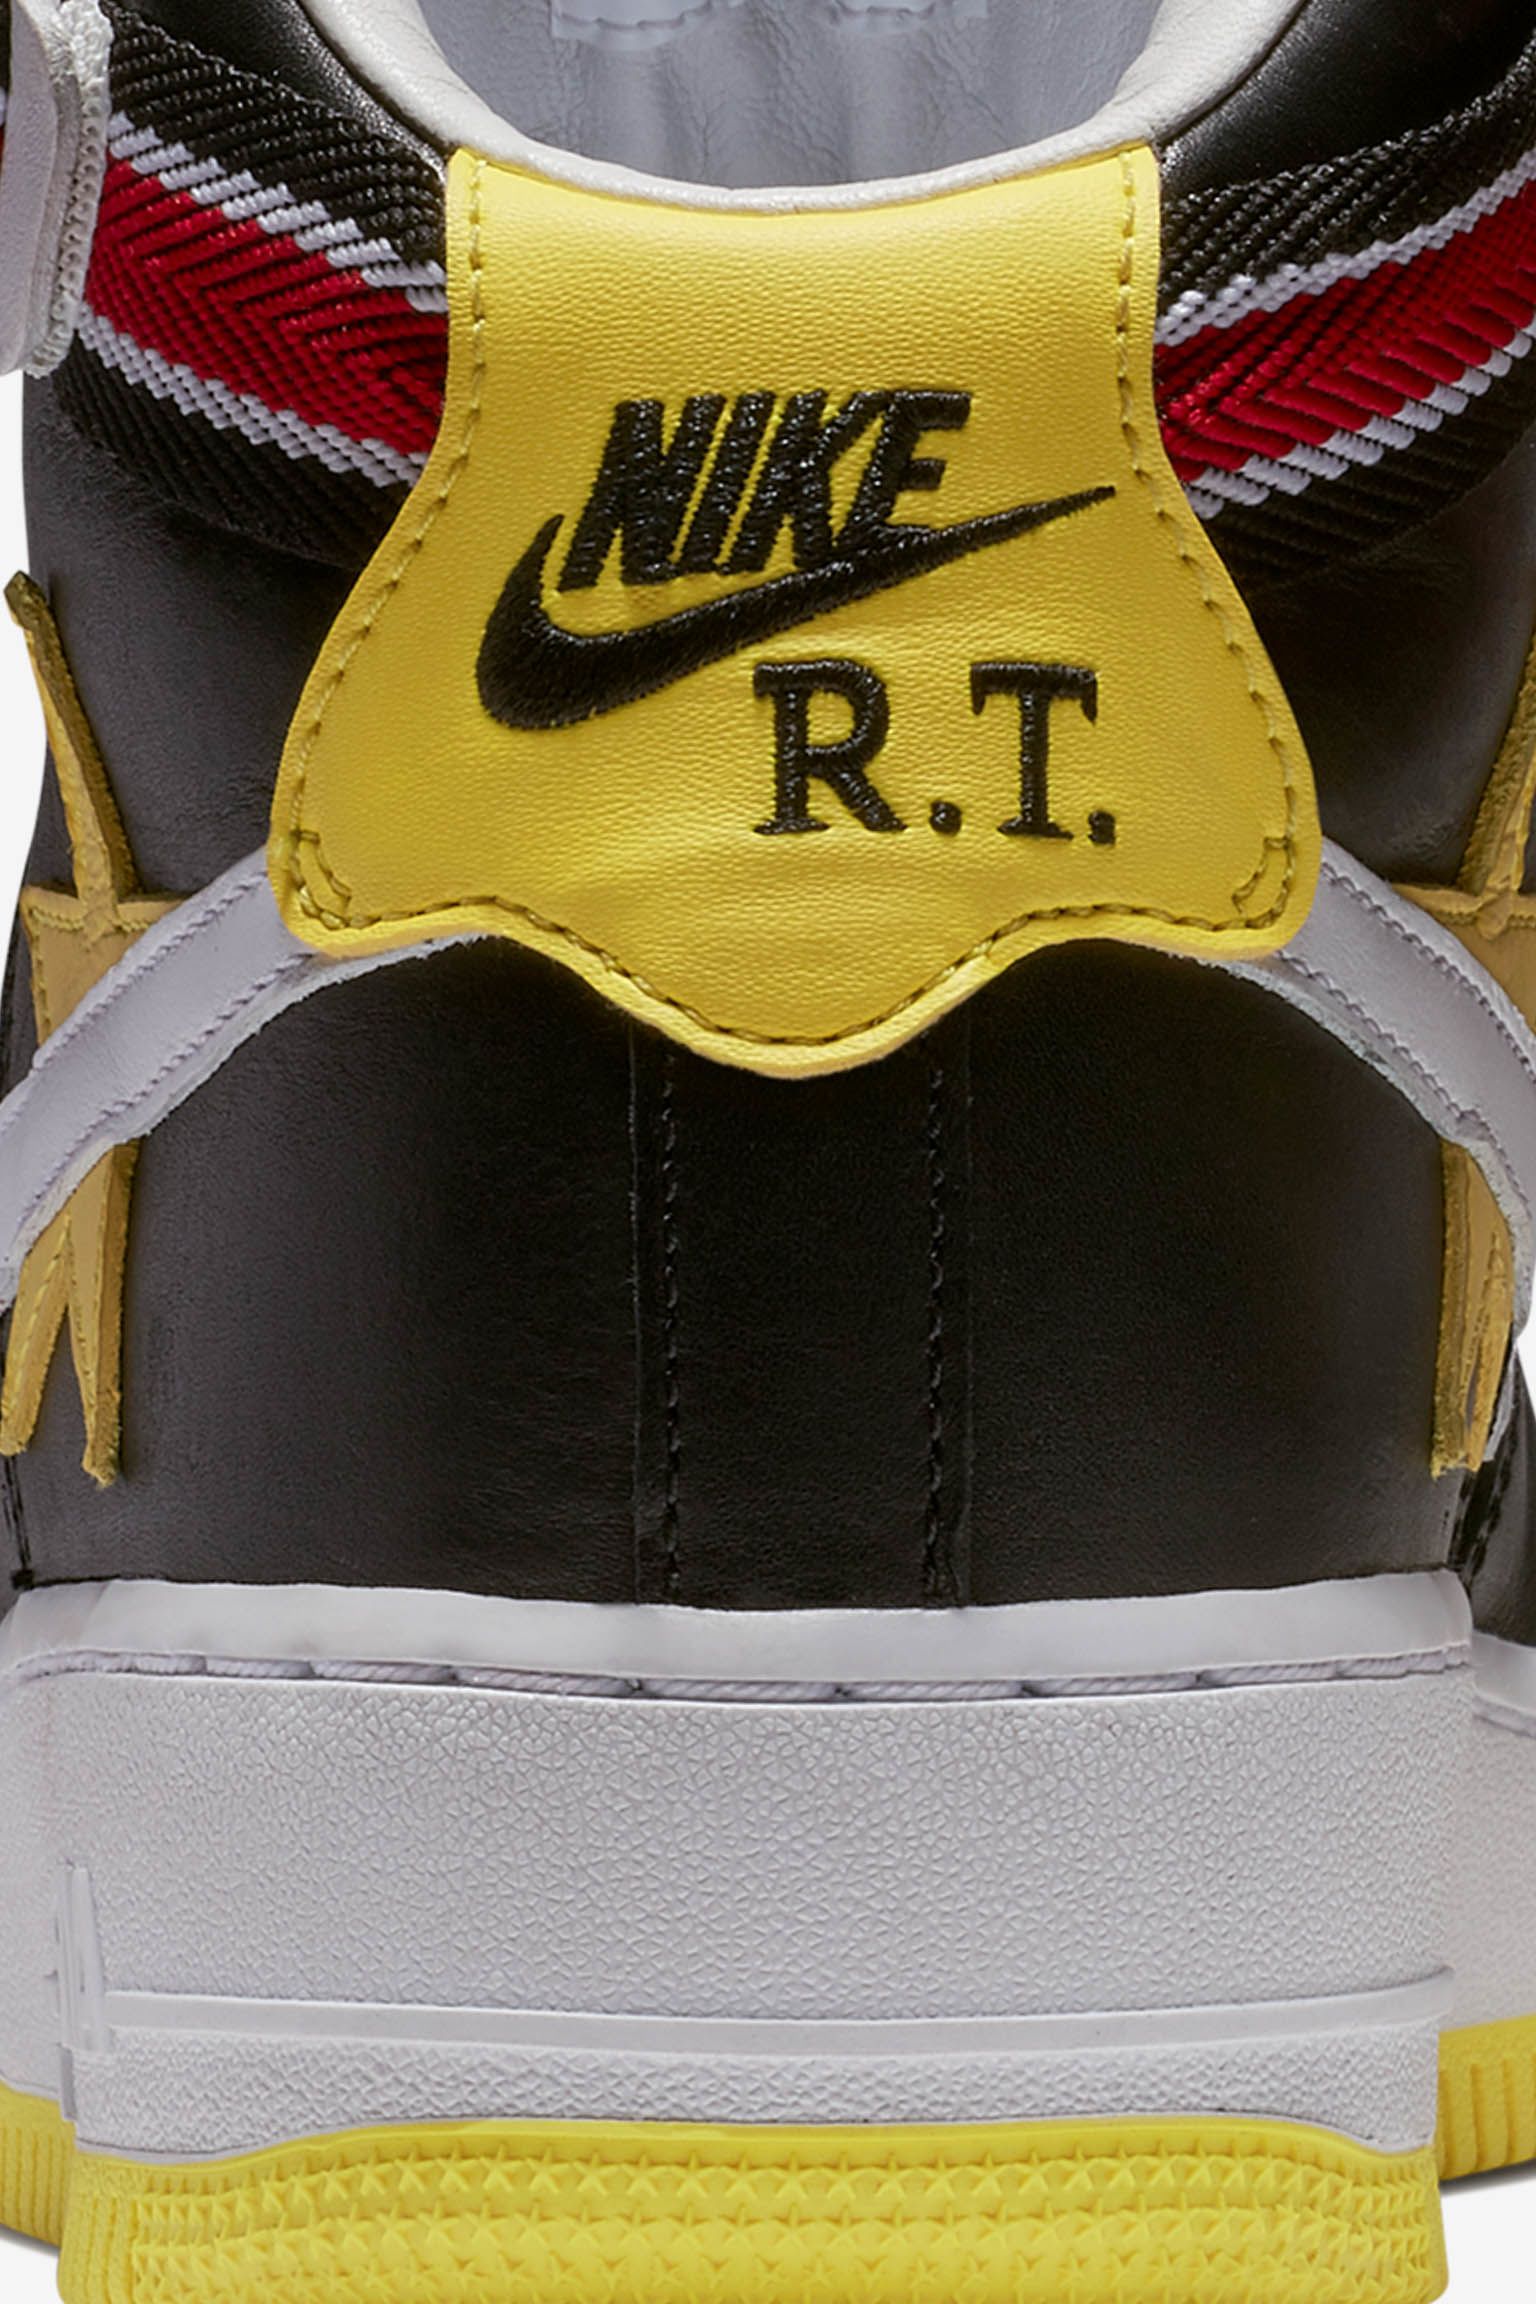 nike air force 1 red and yellow